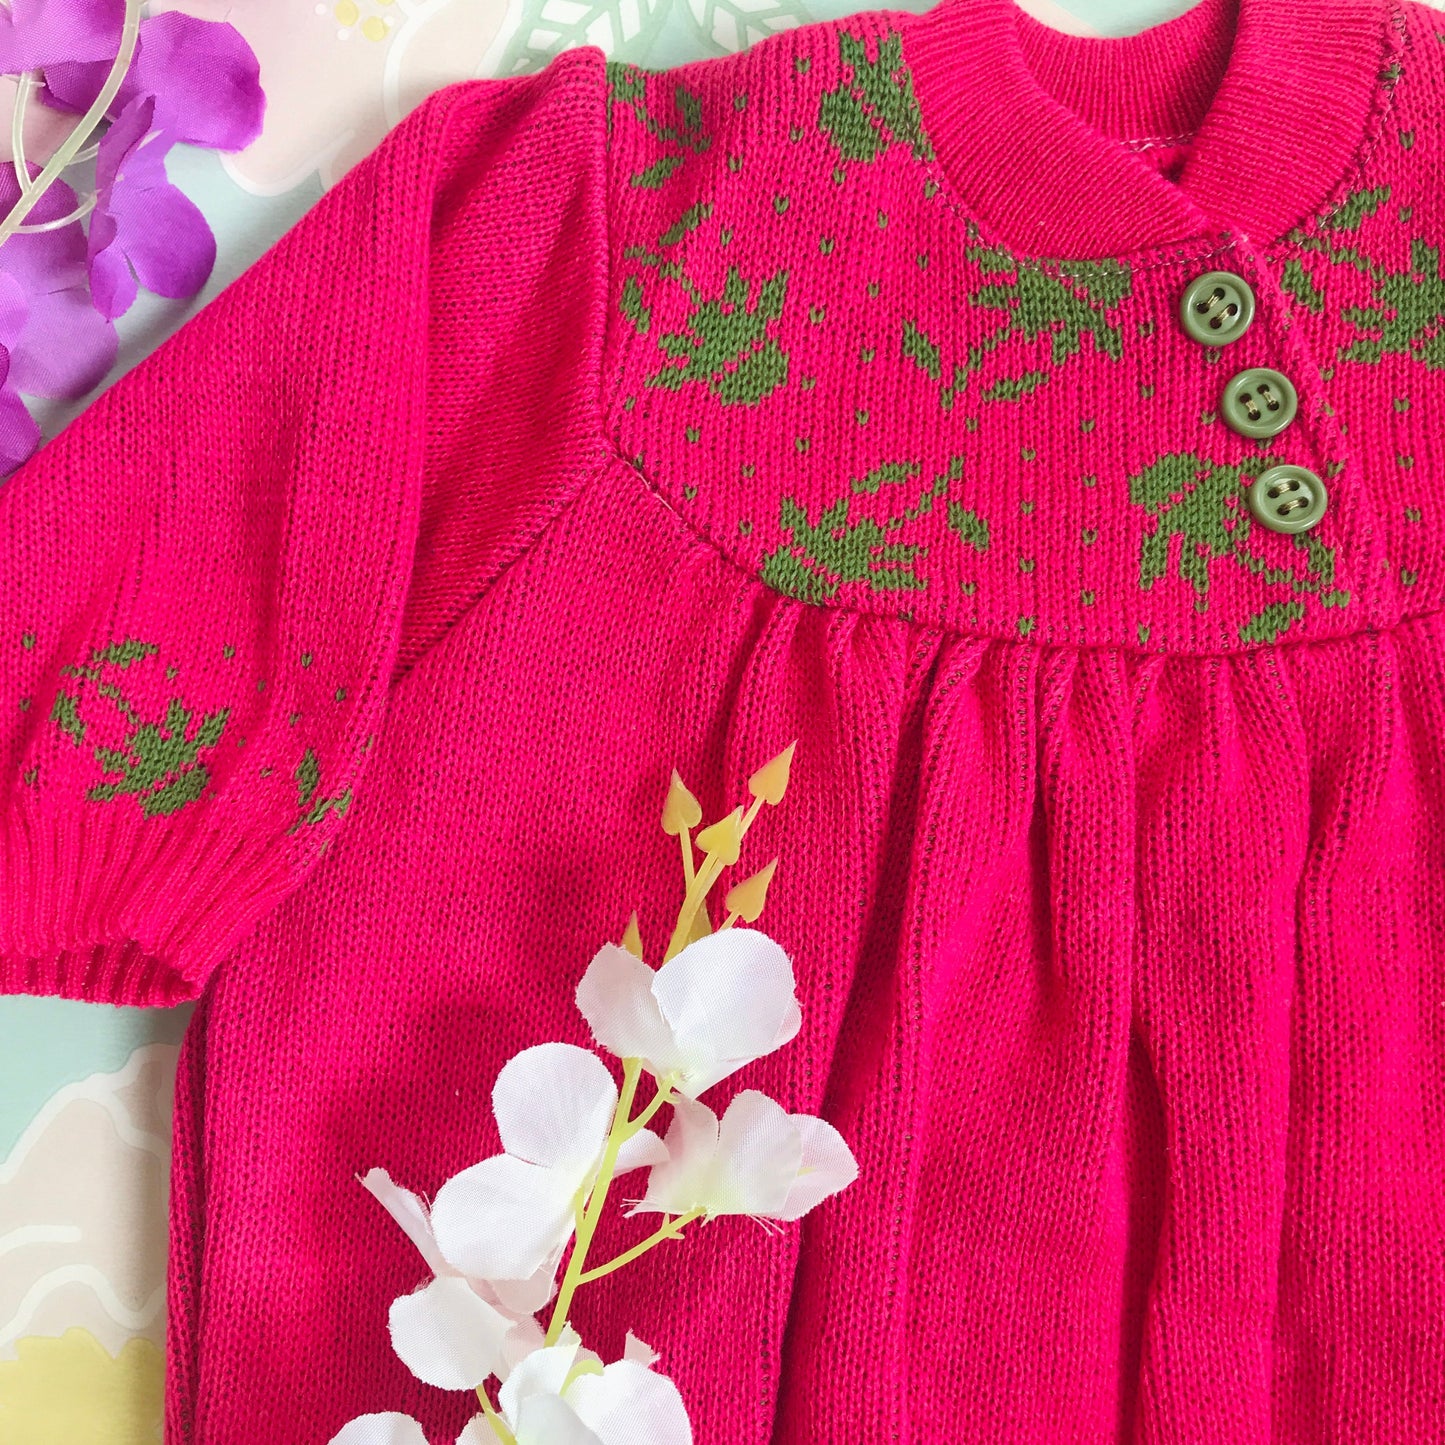 Vintage Deadstock 70's Pink/Green Knitted Baby Dress and Matching Scarf French Made Newborn / 0-3 Months